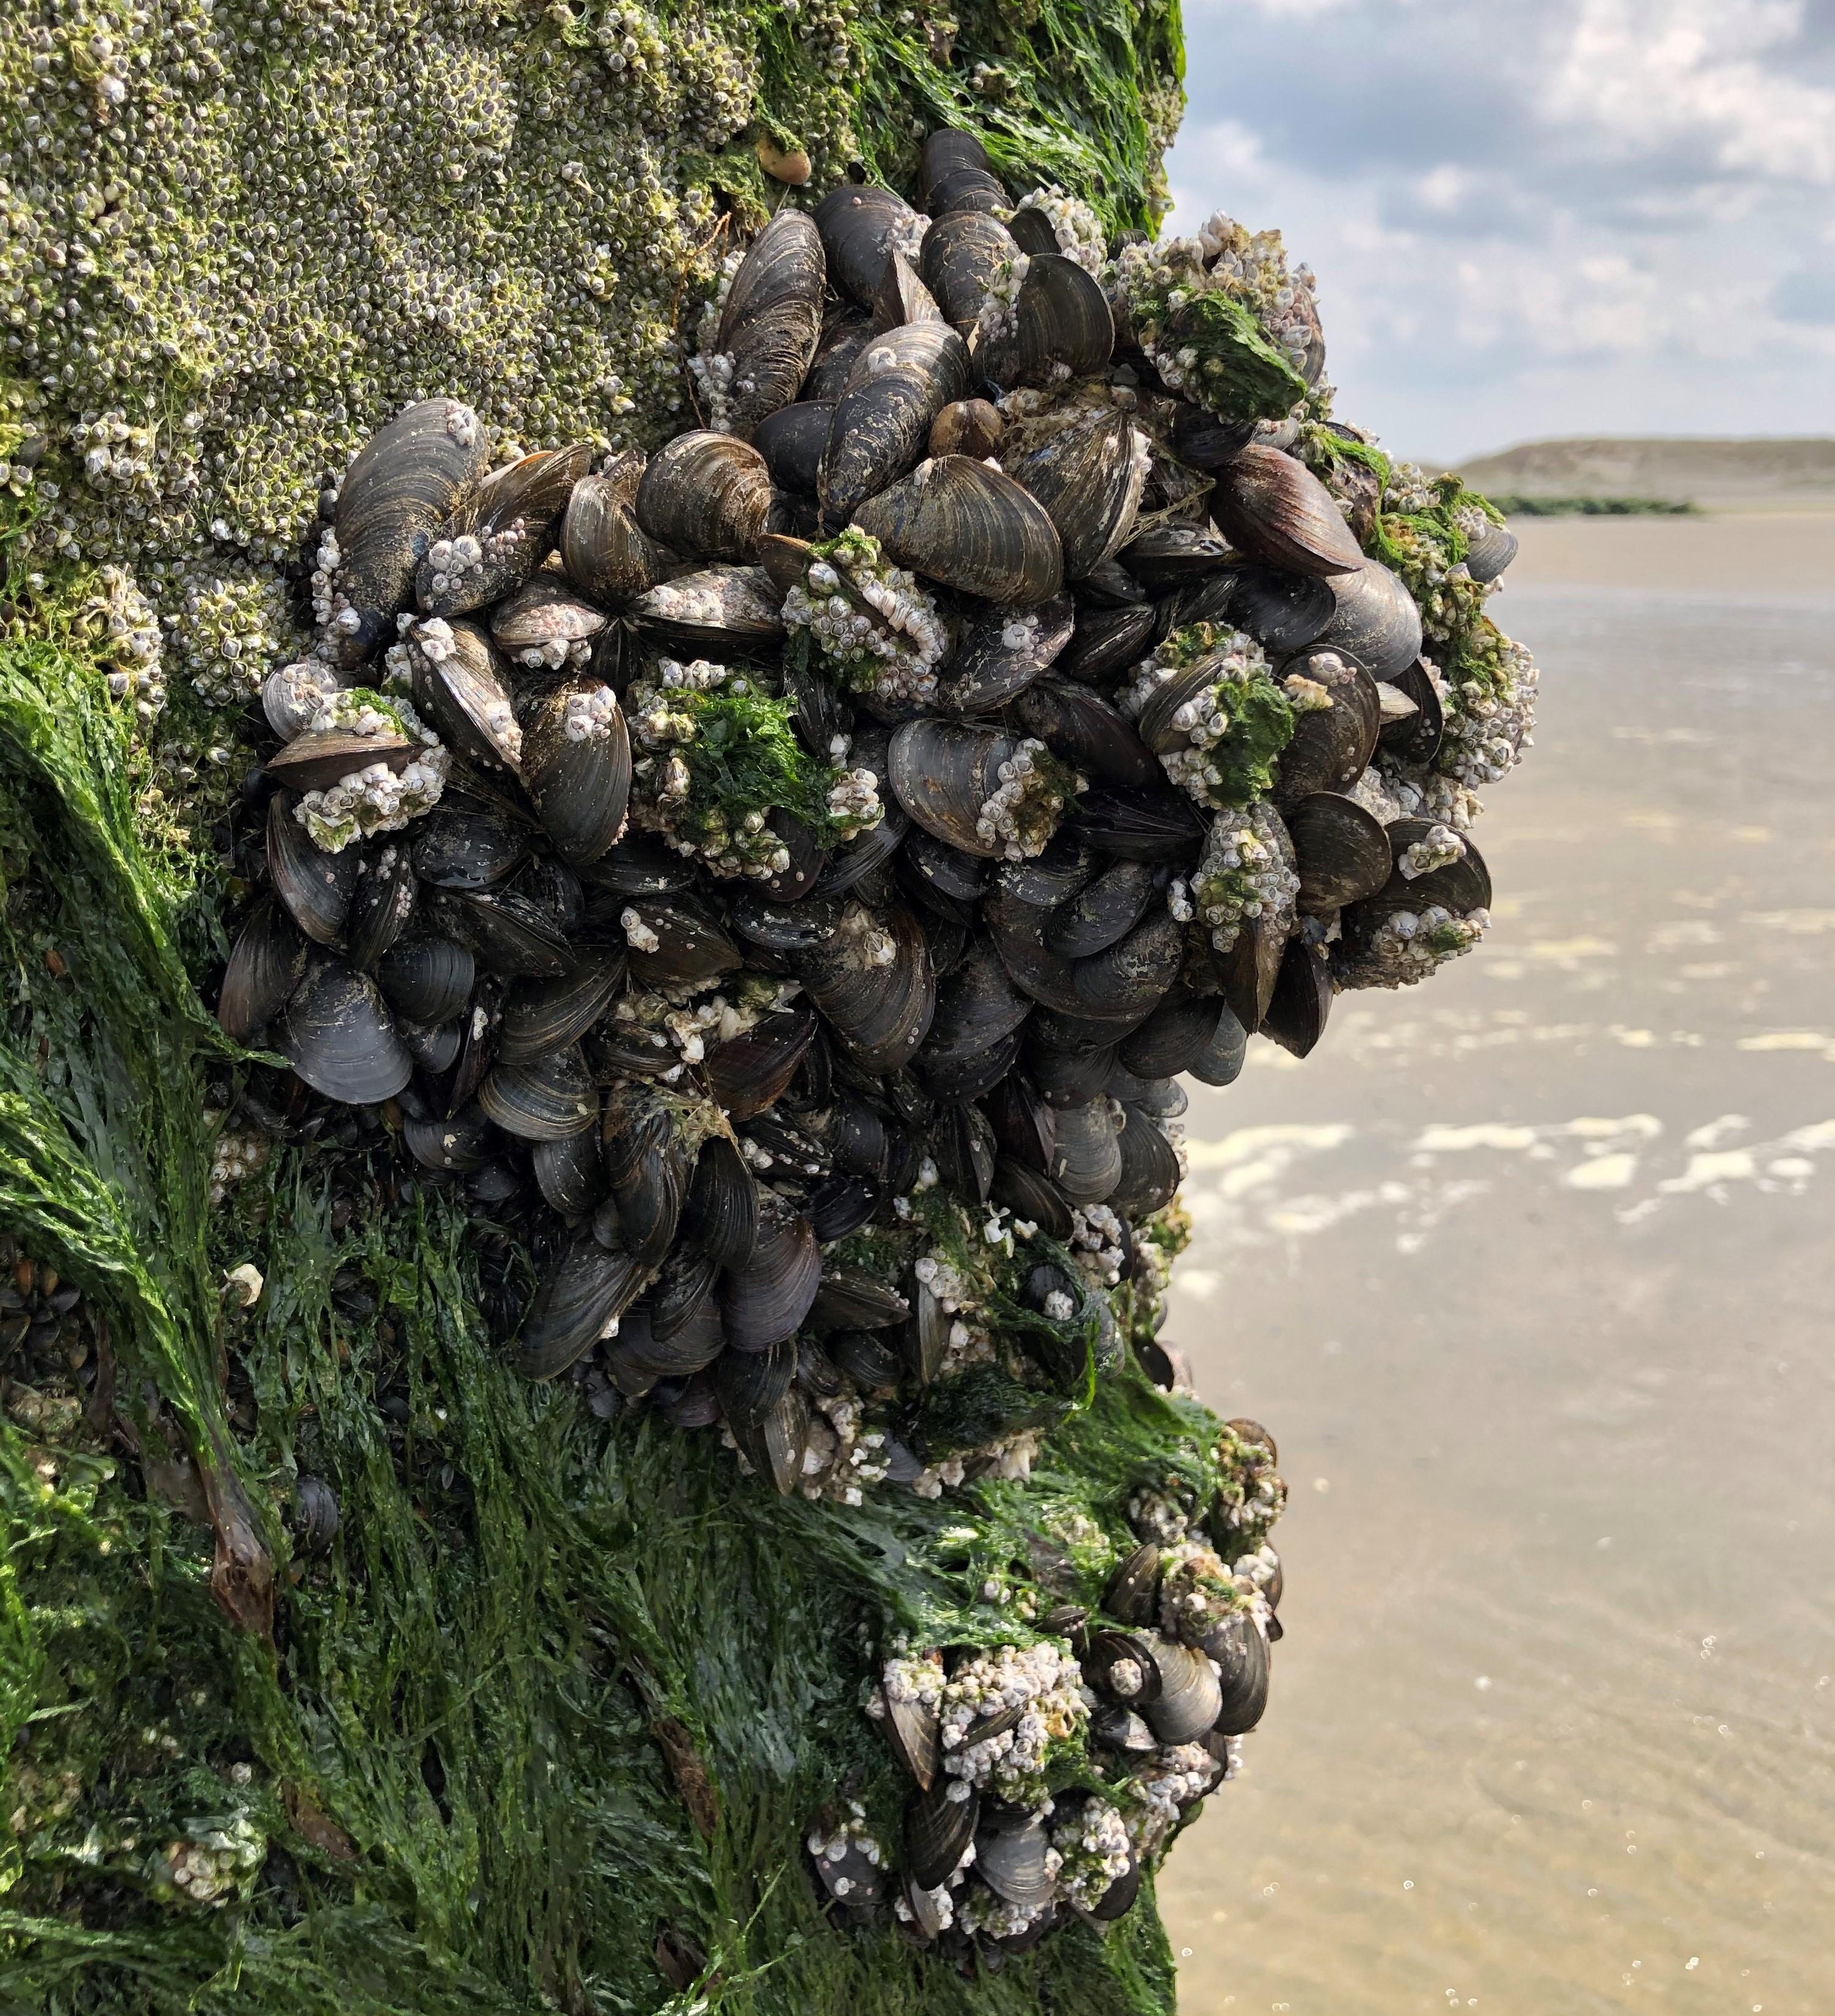 Mussels in their natural habitat at the coast.